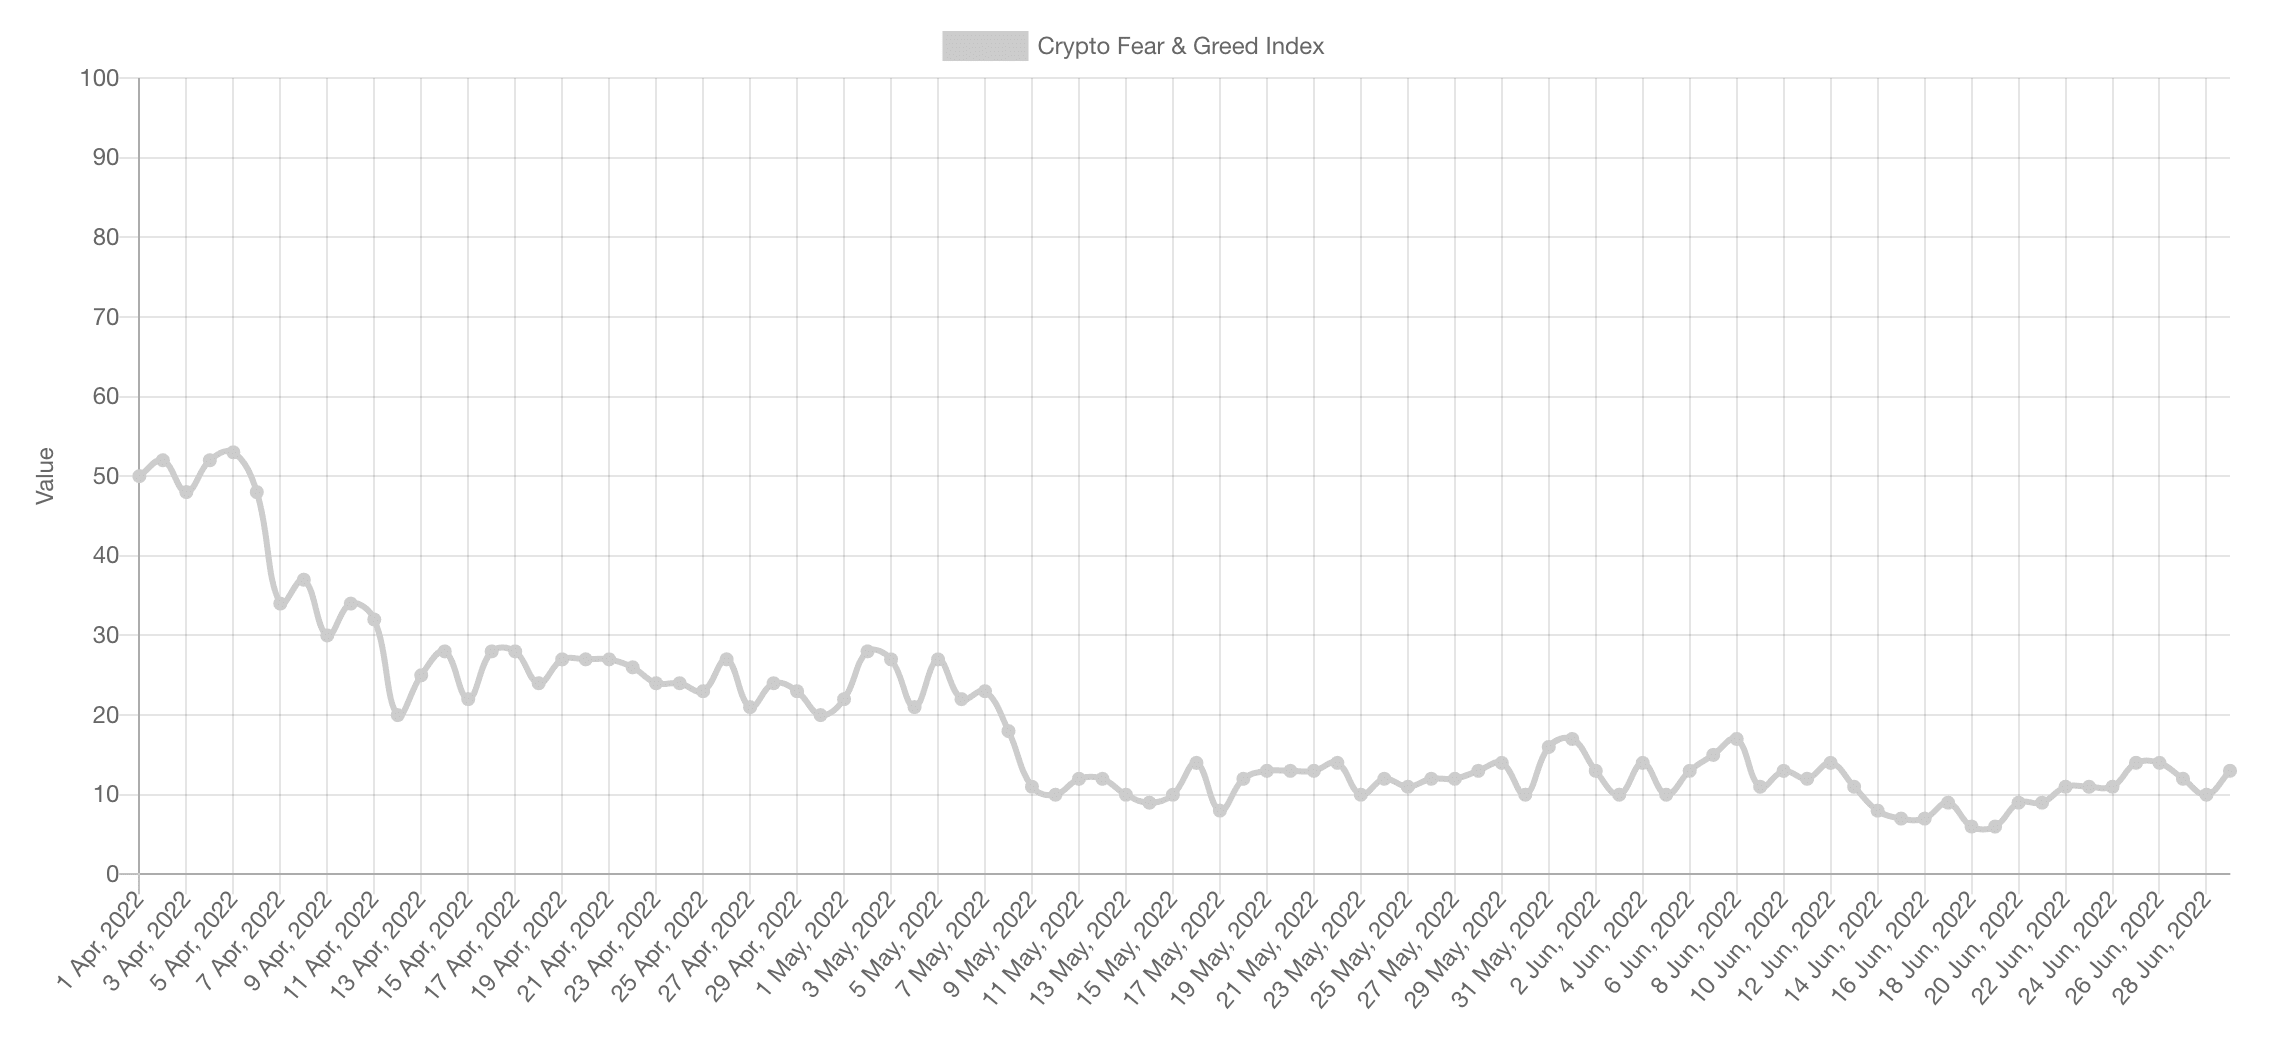 Chart showing the Fear & Greed Index between April 1 and June 28, 2022.